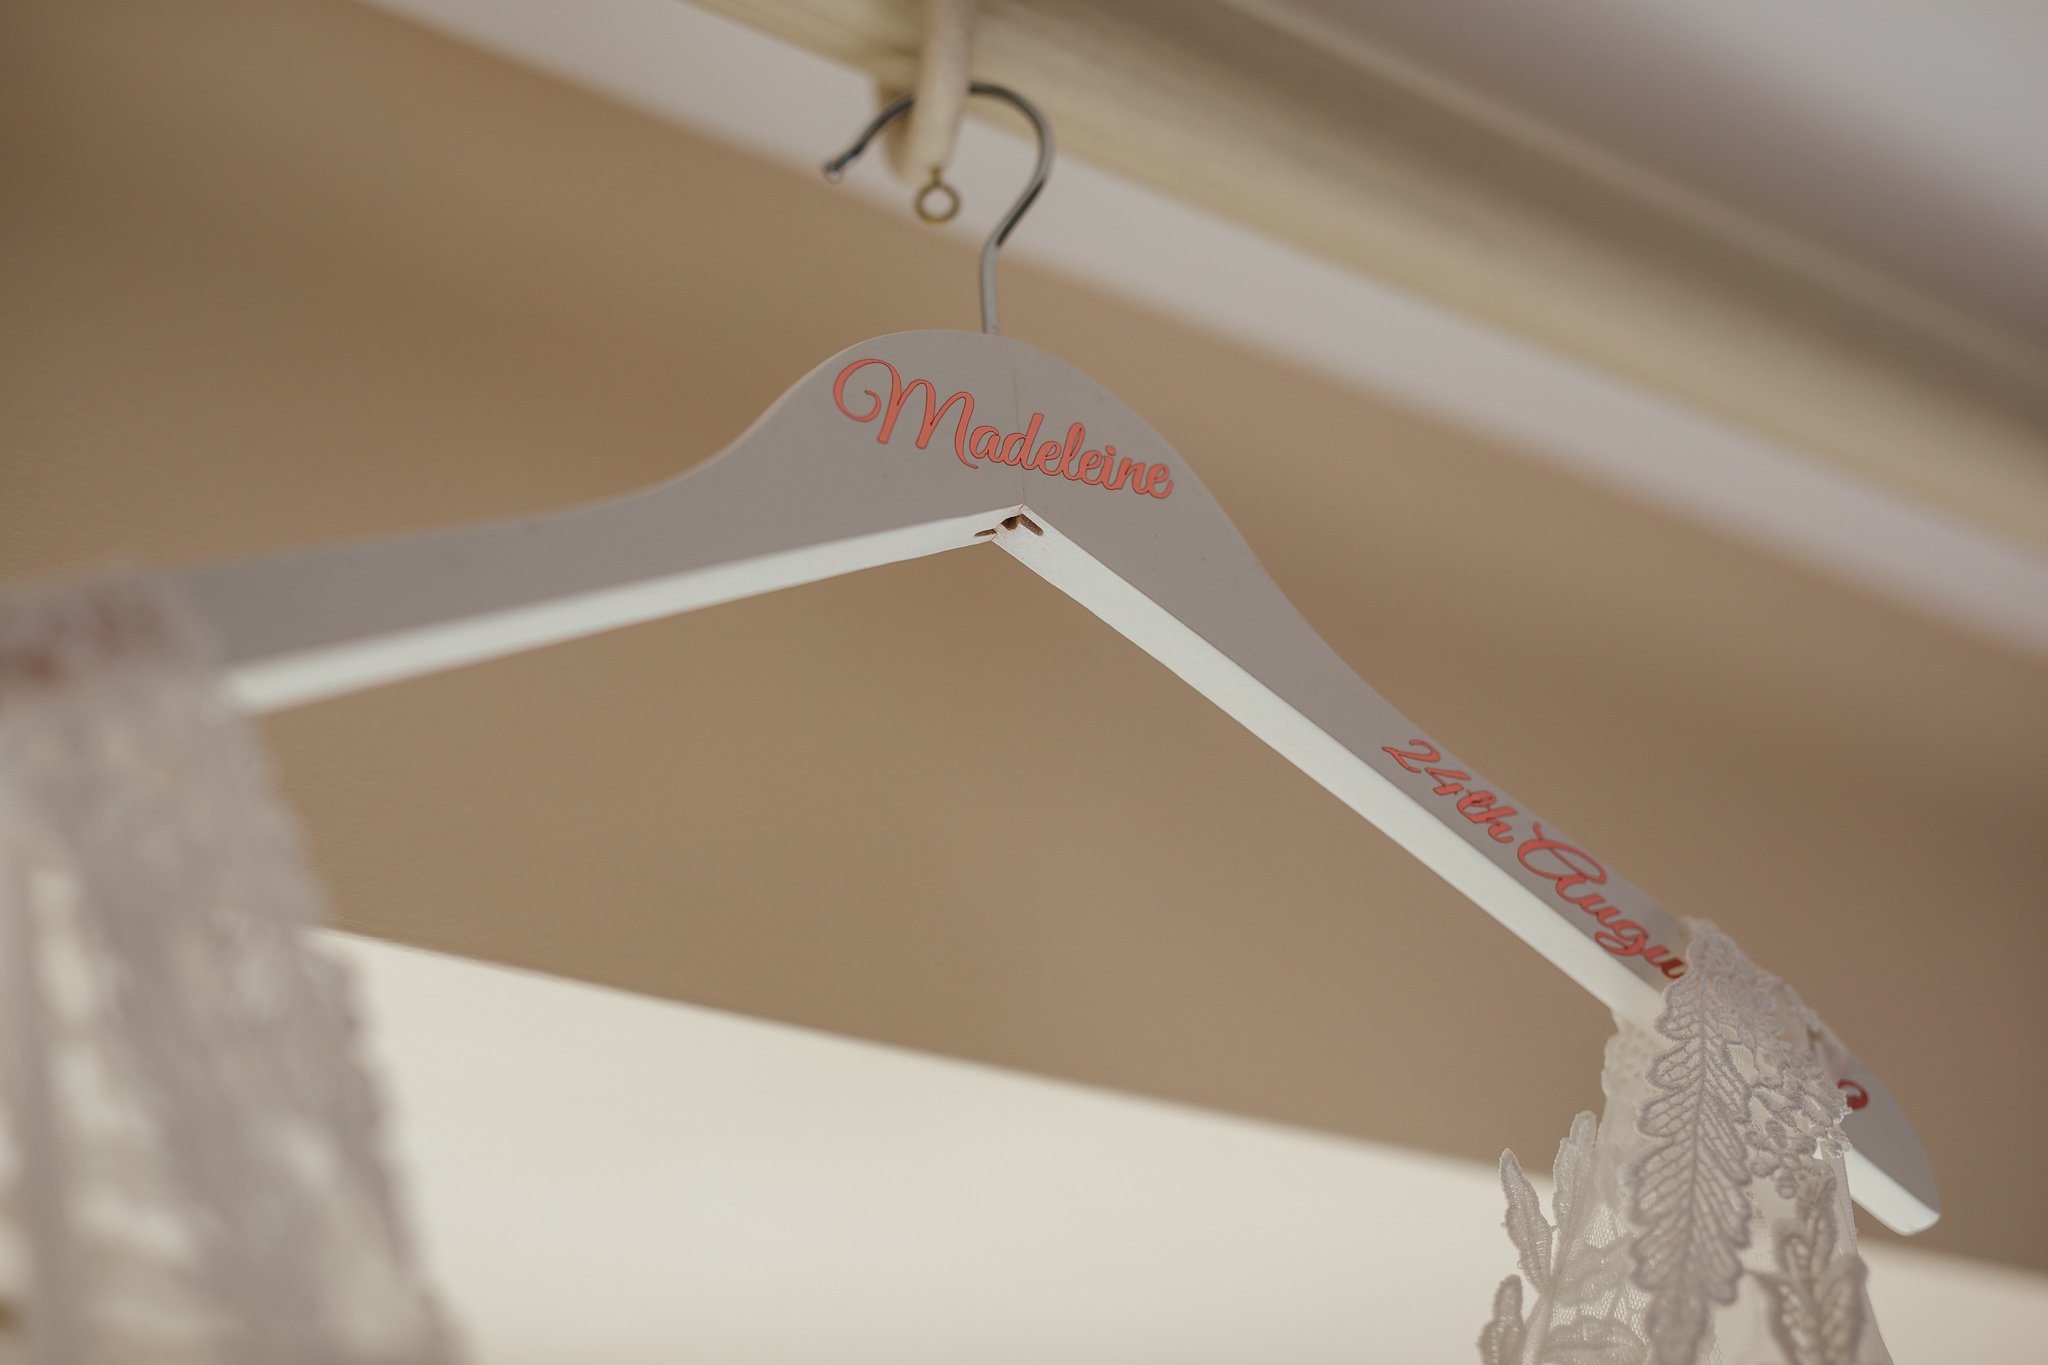  Bride’s dress hangs up on a clothes hanger showing her name 